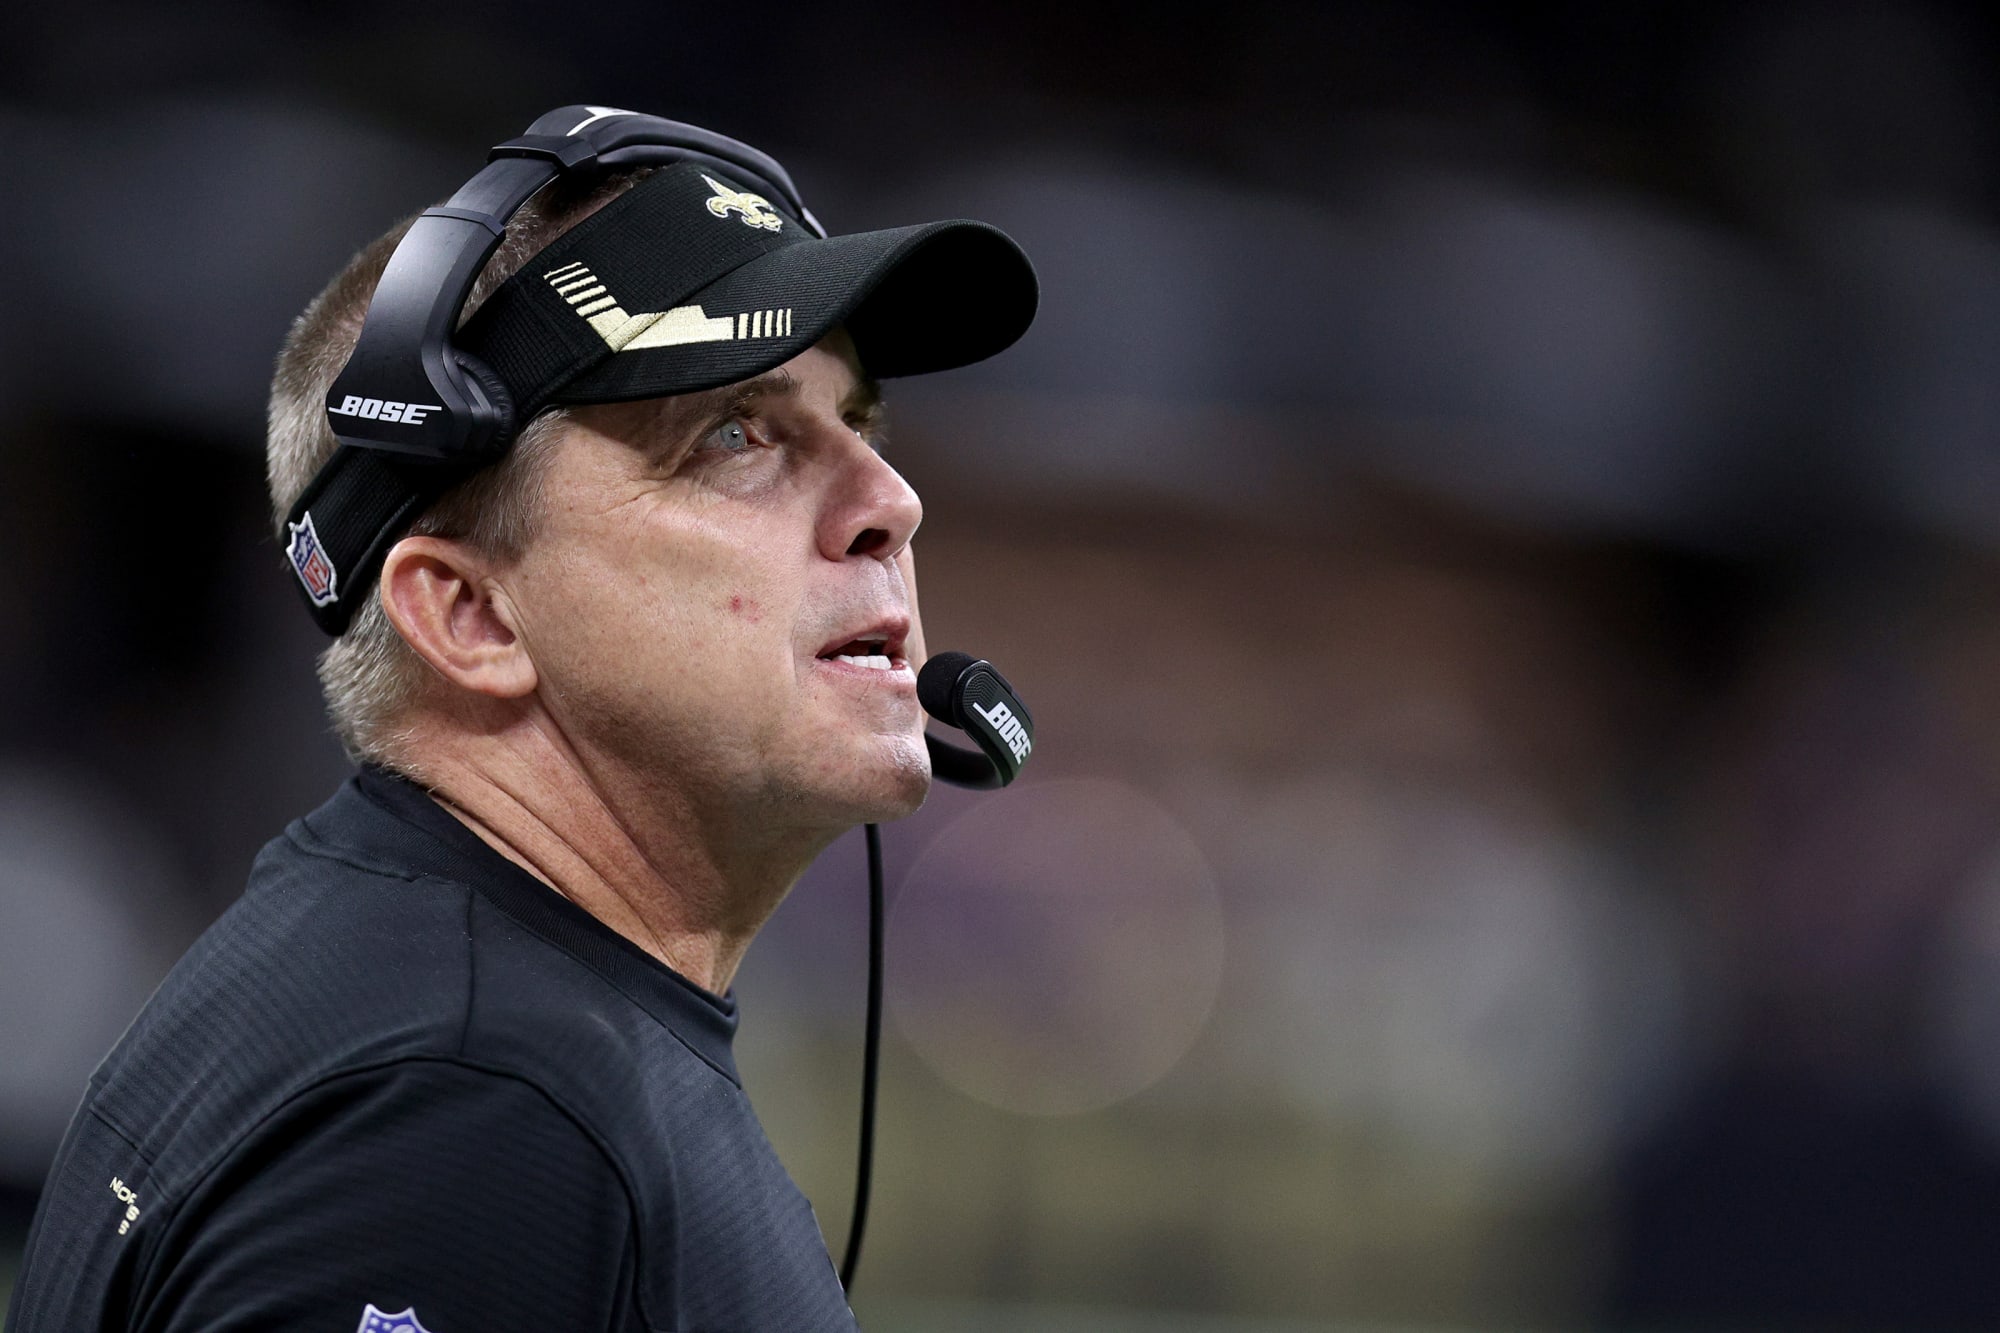 Yet another team has bowed out of Sean Payton sweepstakes